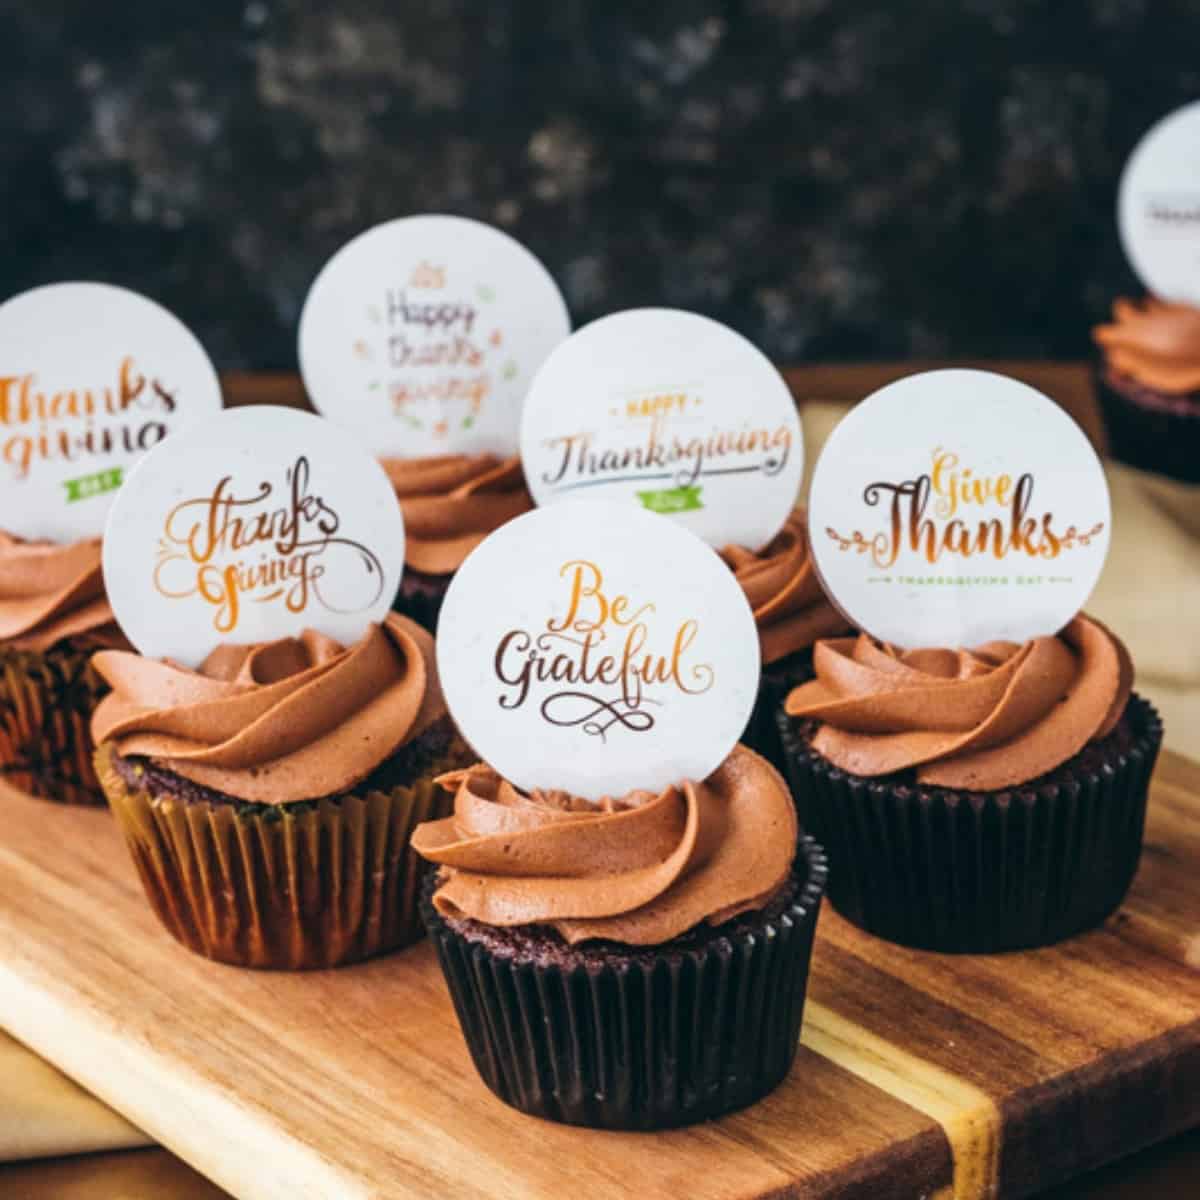 https://iscreamforbuttercream.com/wp-content/uploads/2019/11/42-give-thanks-cupcake-toppers-featured-image.jpg